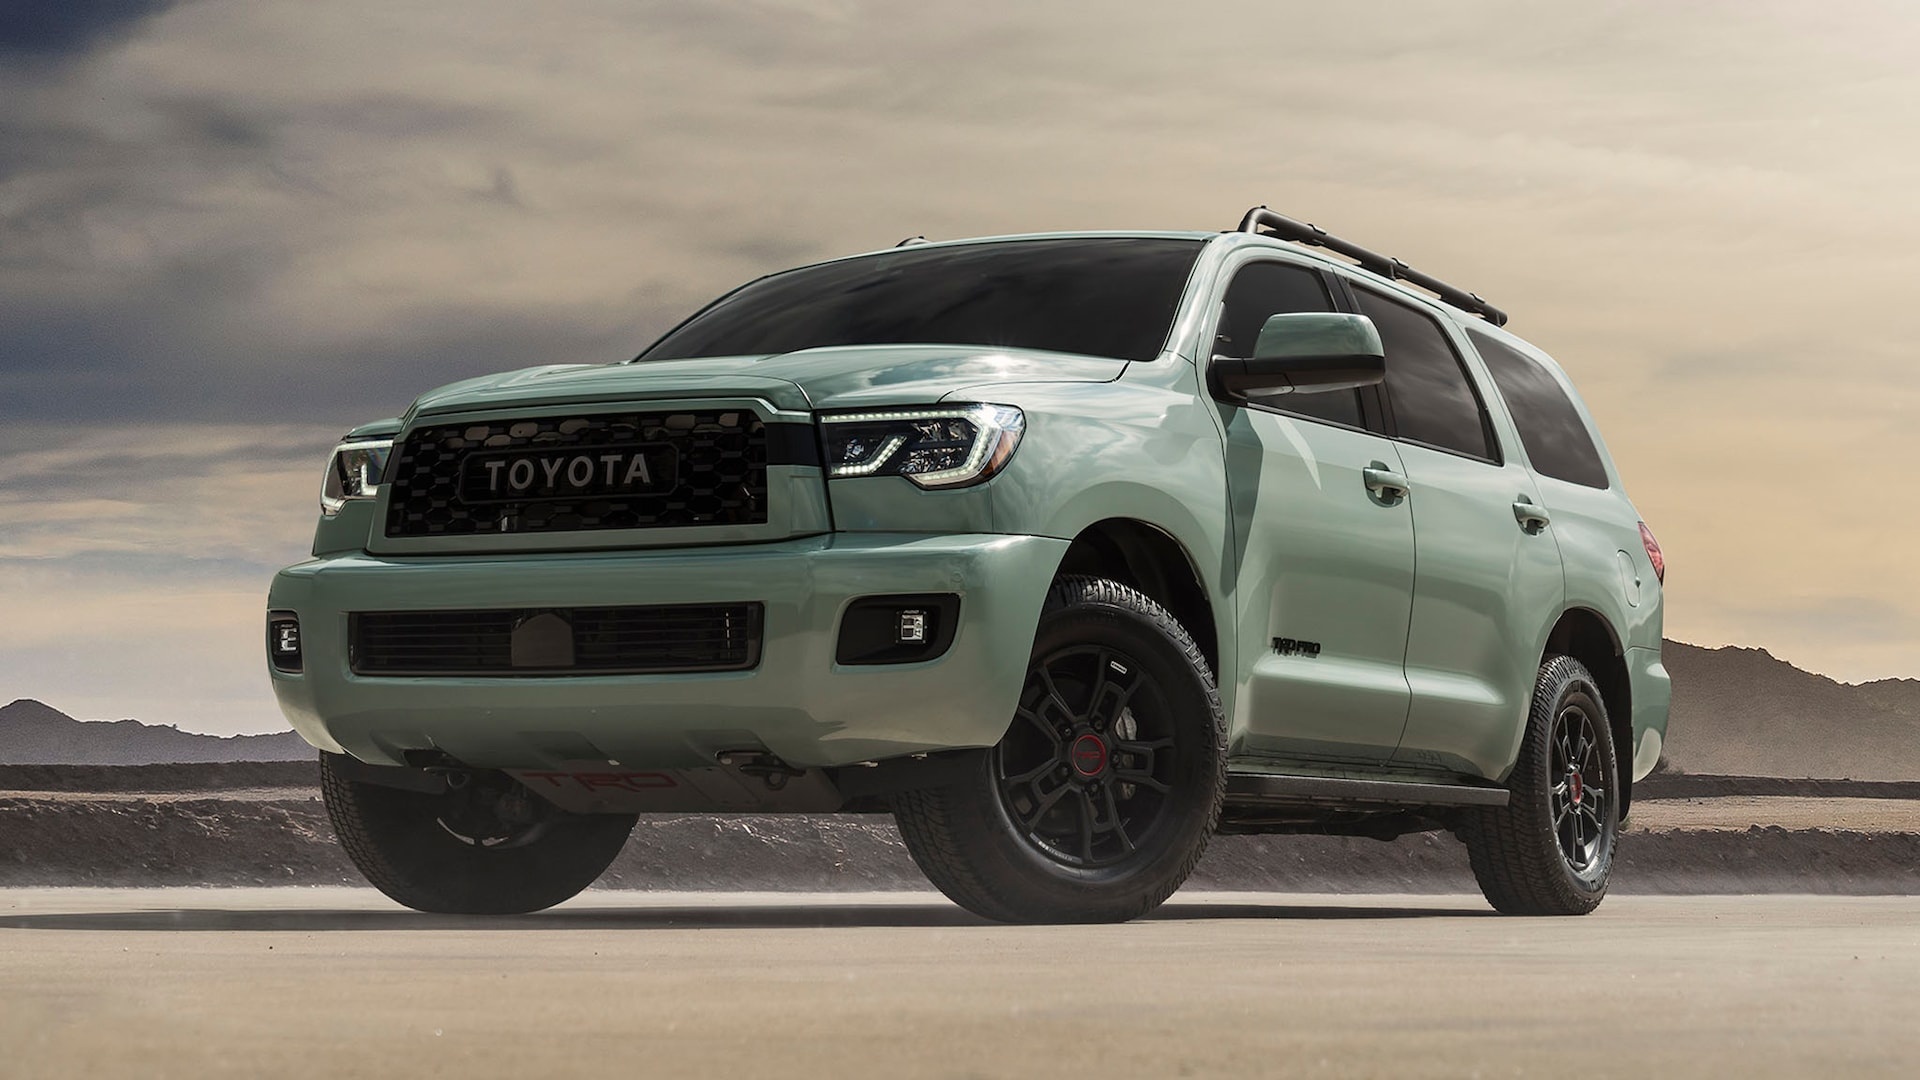 Toyota Sequoia, 2021 buyers guide, Specs and comparisons, Reliable SUV, 1920x1080 Full HD Desktop